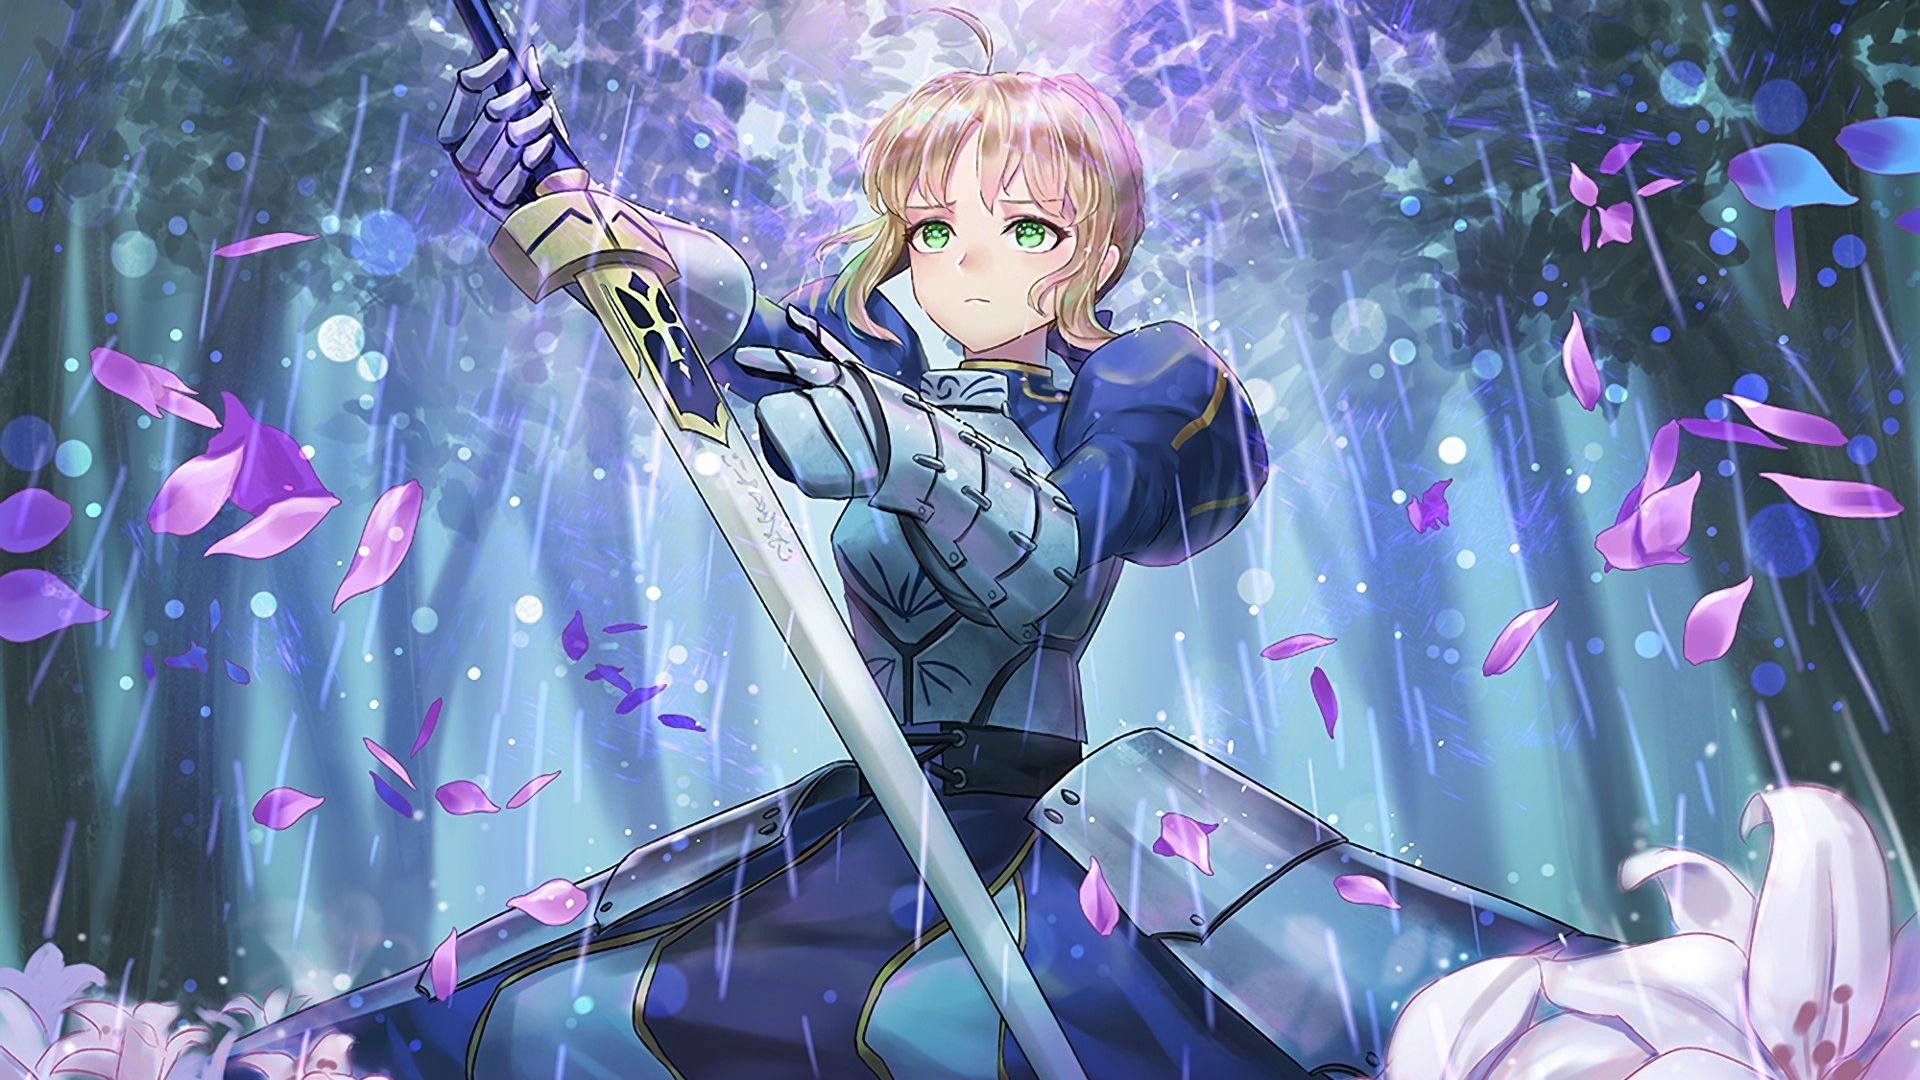 Wallpaper Blossom, Fate/Stay Night, anime girl, saber, fate series